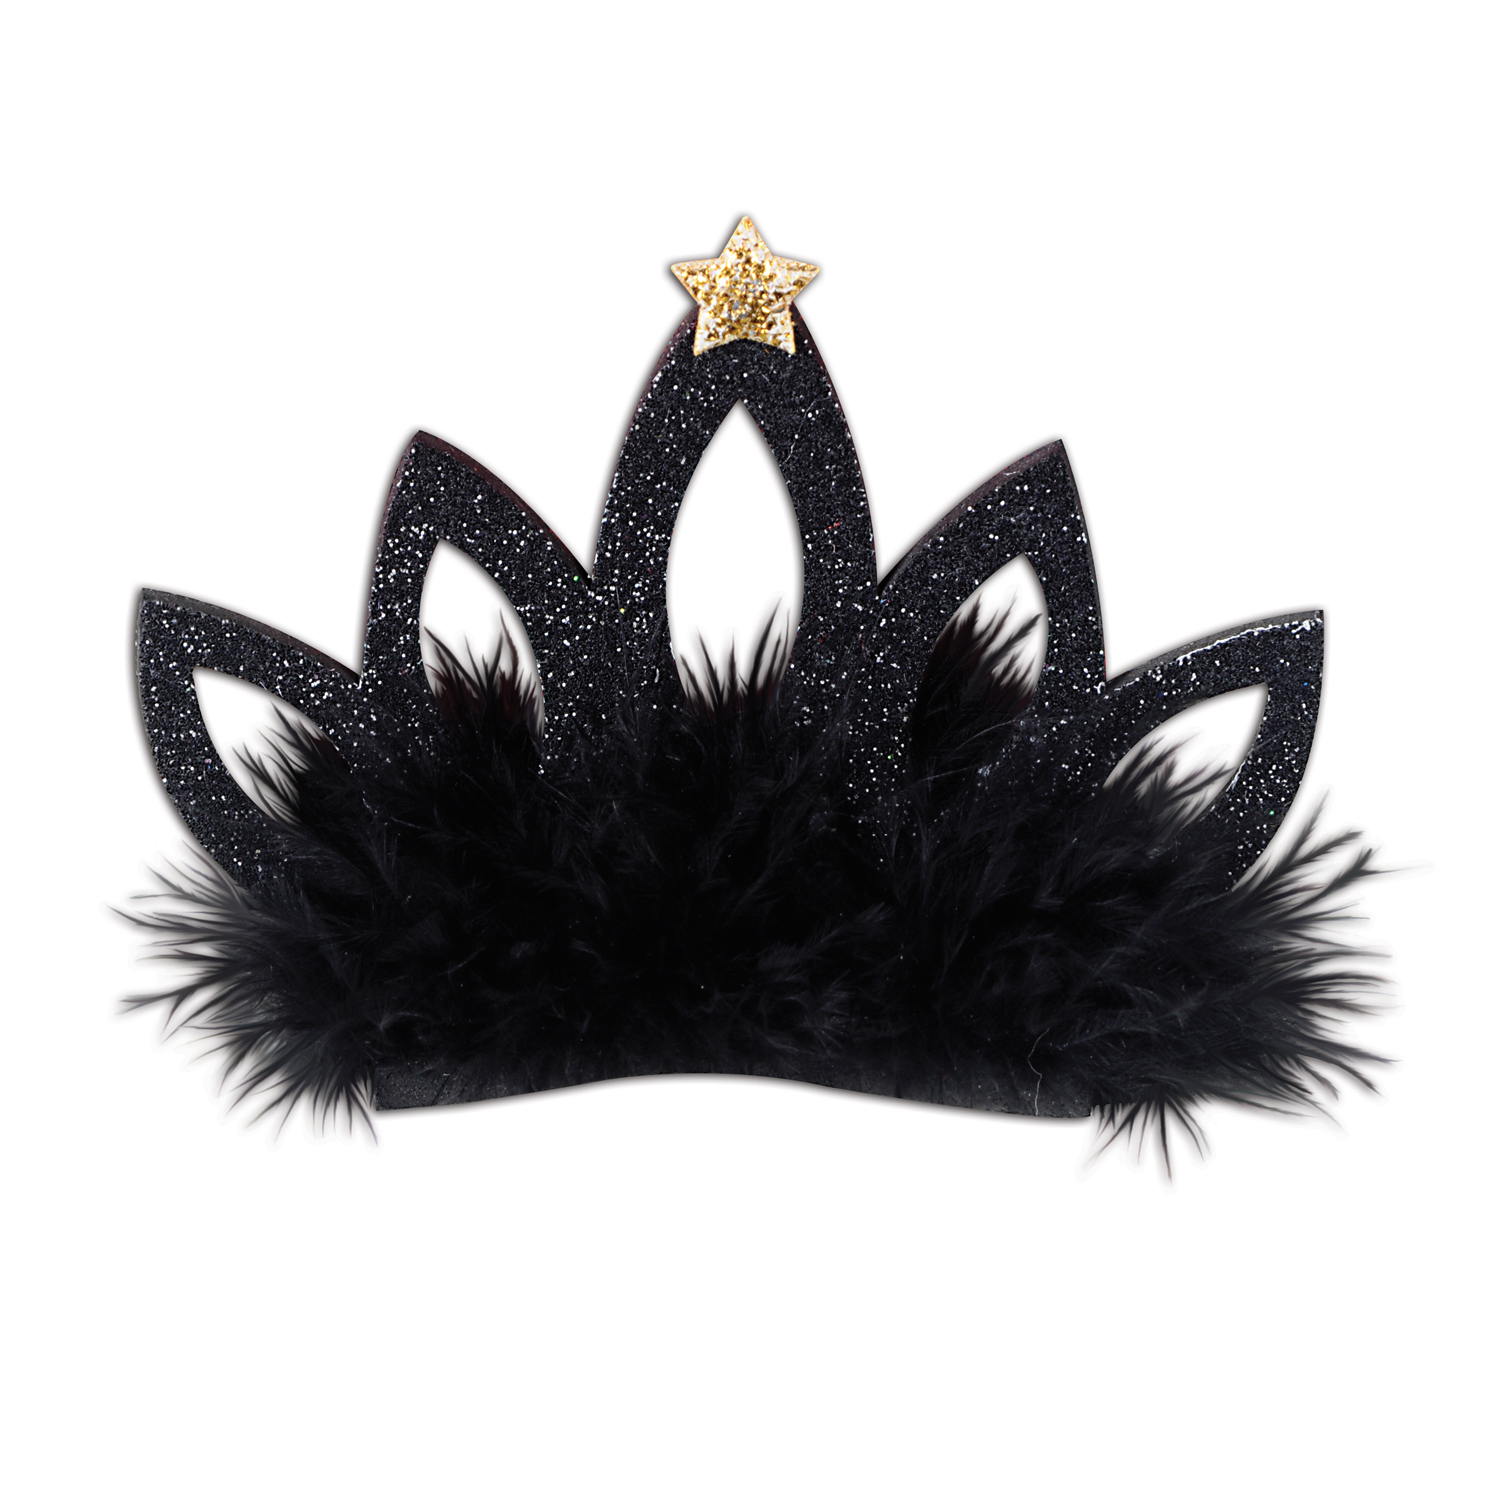 Black small tiara with black material and soft fuzzy bottom attached to a metal hair clip.